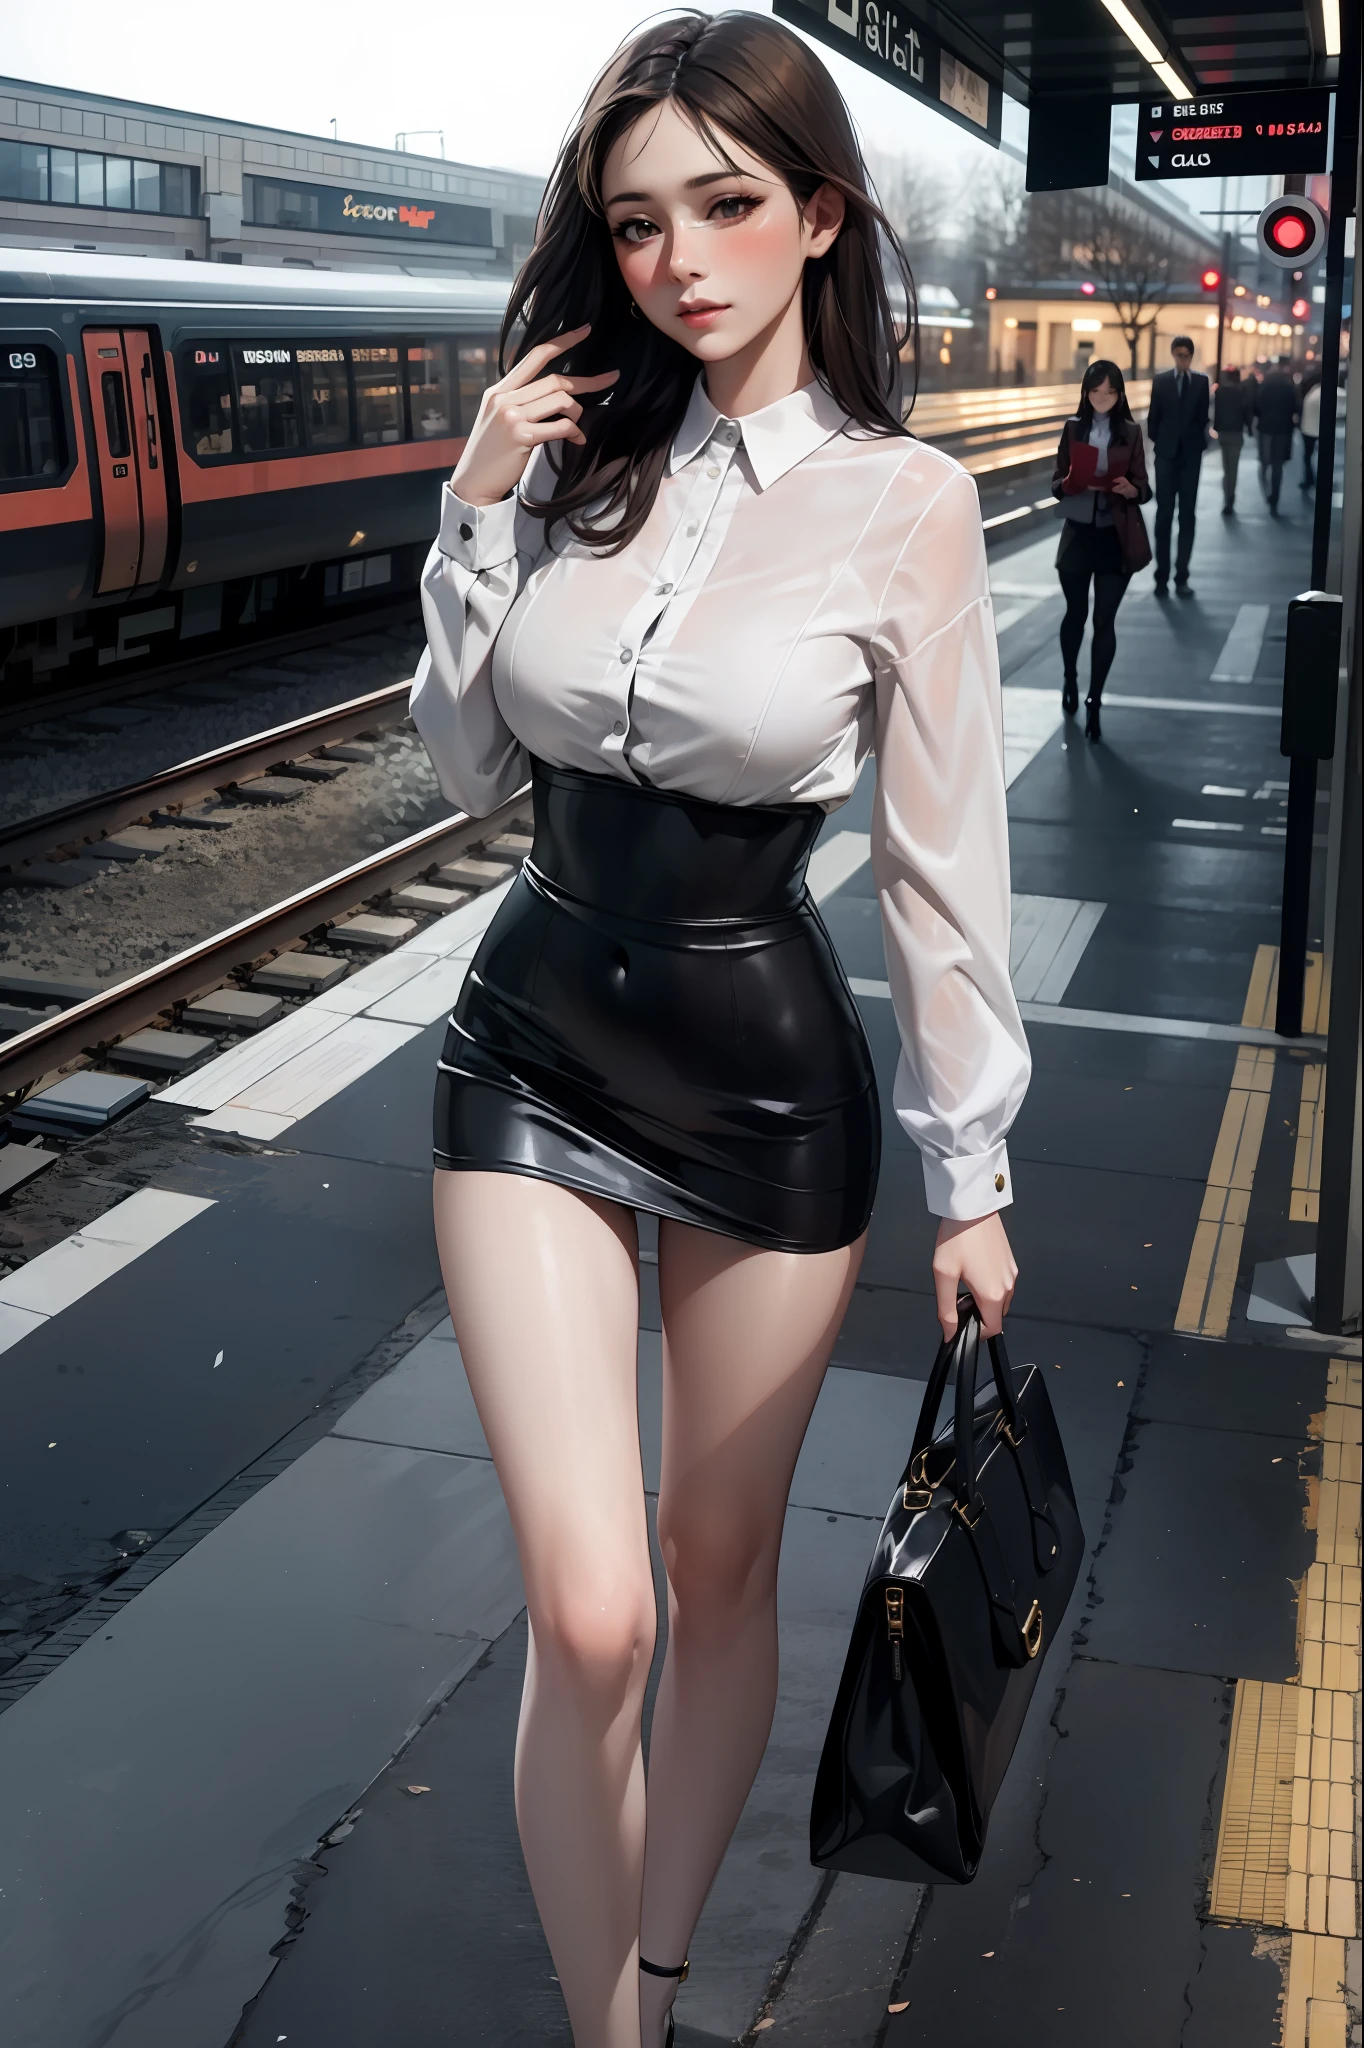 ((Best quality)), blurred (realism: 1.4, lifelike), high-detail CG unified 8K wallpaper, 1 girl, illuminated by soft light, high quality, (full-body shot), (outdoors, in a crowd), white suit, ultra-short pencil skirt, black stockings, golden-rimmed glasses, peep-toe high heels), large breasts, beautiful face, slim figure, model standing posture, shy and blushing, mature and intellectual.